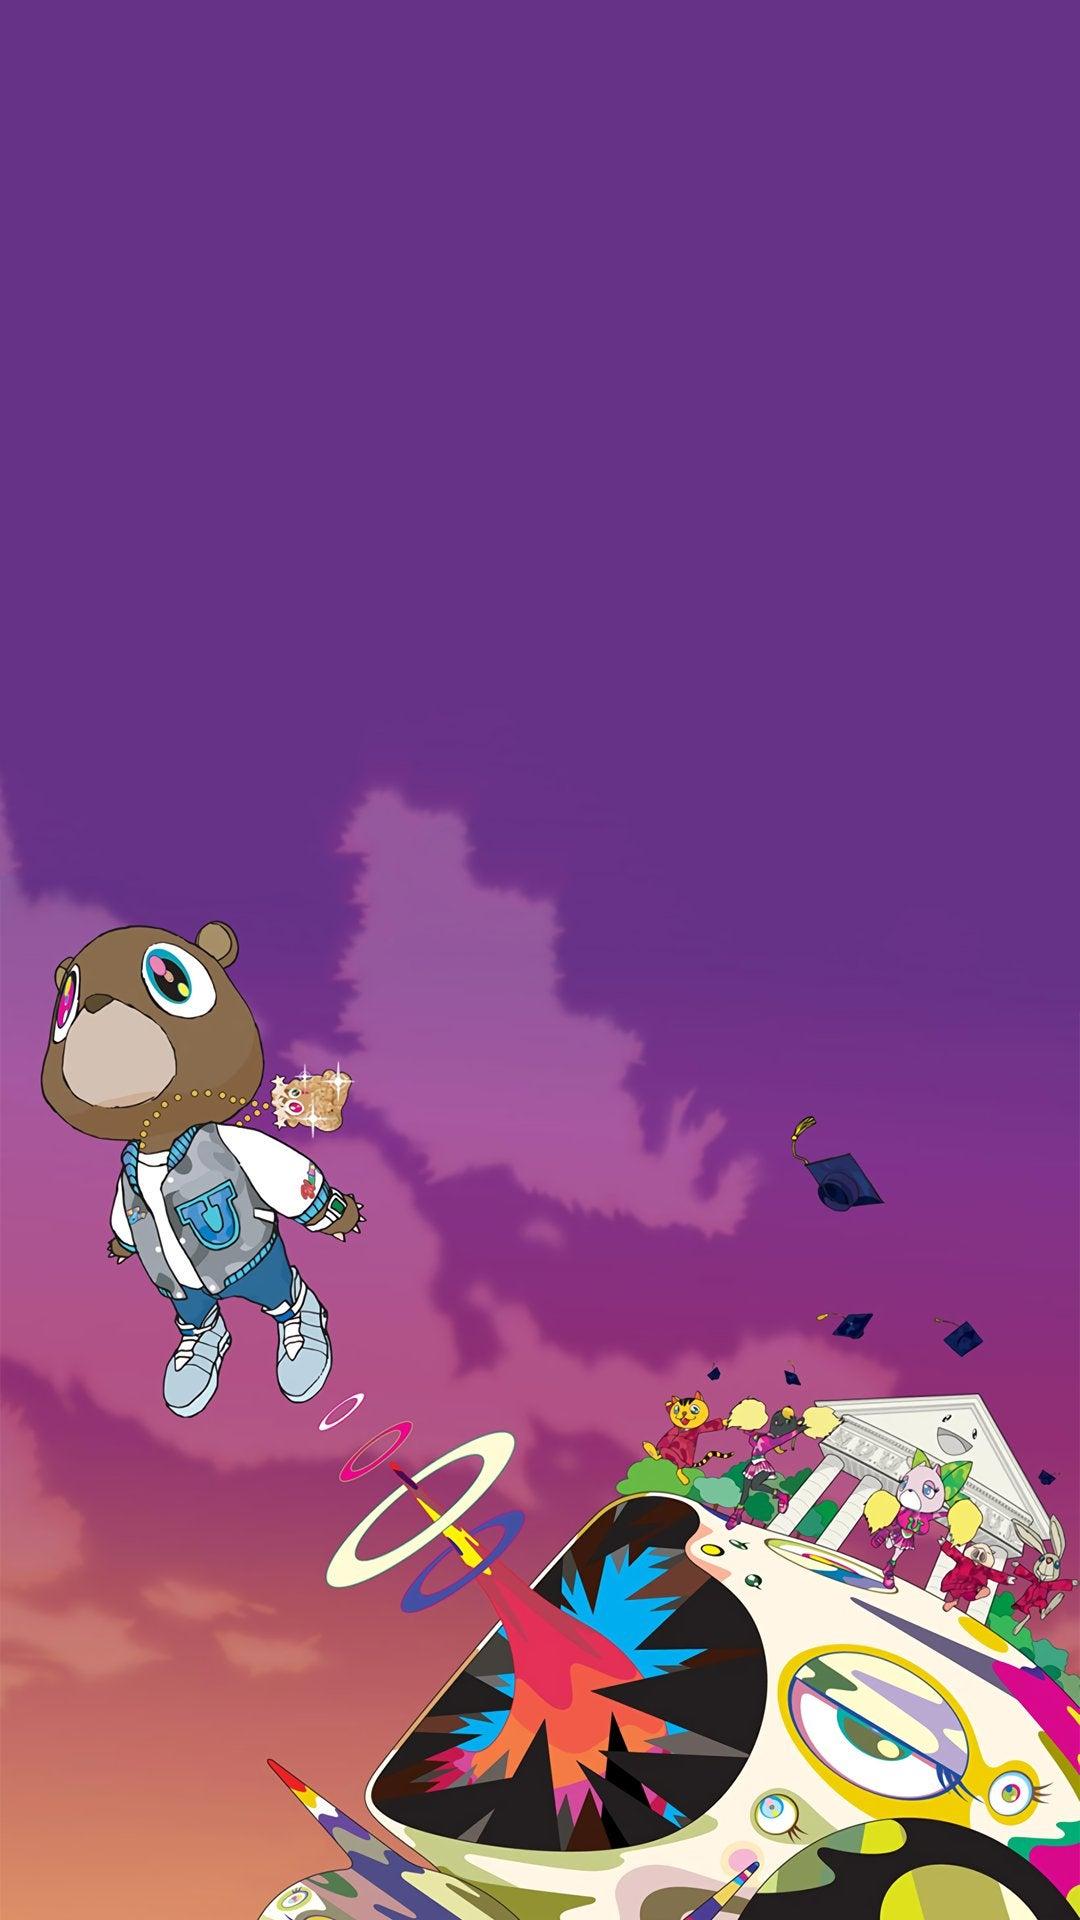 15 Kanye West Wallpapers  Backgrounds for Your iPhone  Gridfiti  Kanye  west wallpaper Wallpaper backgrounds Pretty phone backgrounds